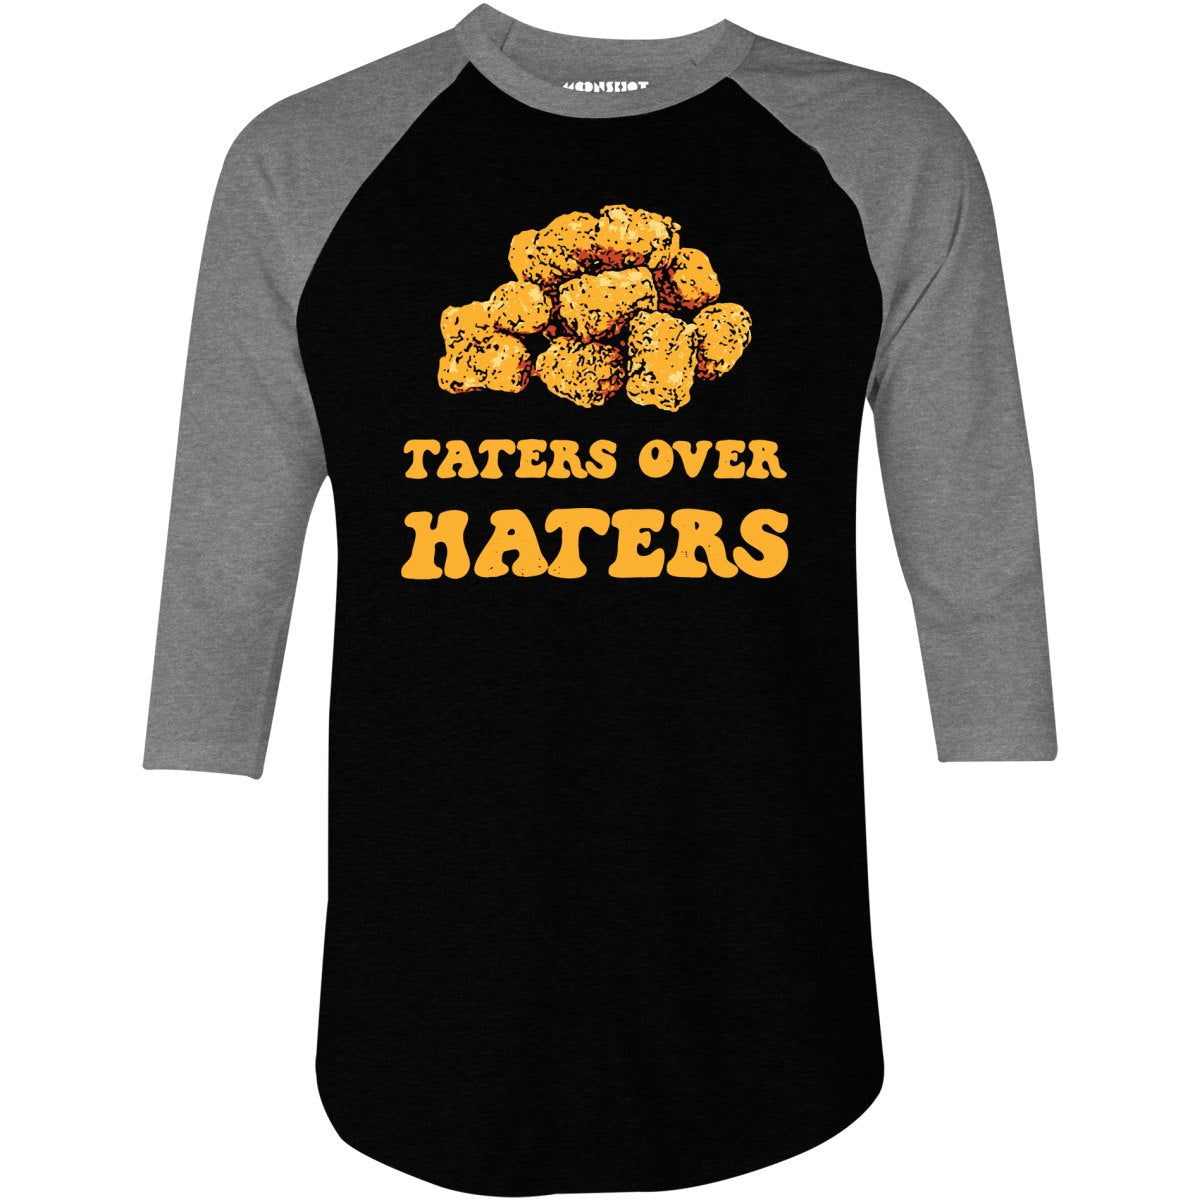 Taters Over Haters - 3/4 Sleeve Raglan T-Shirt